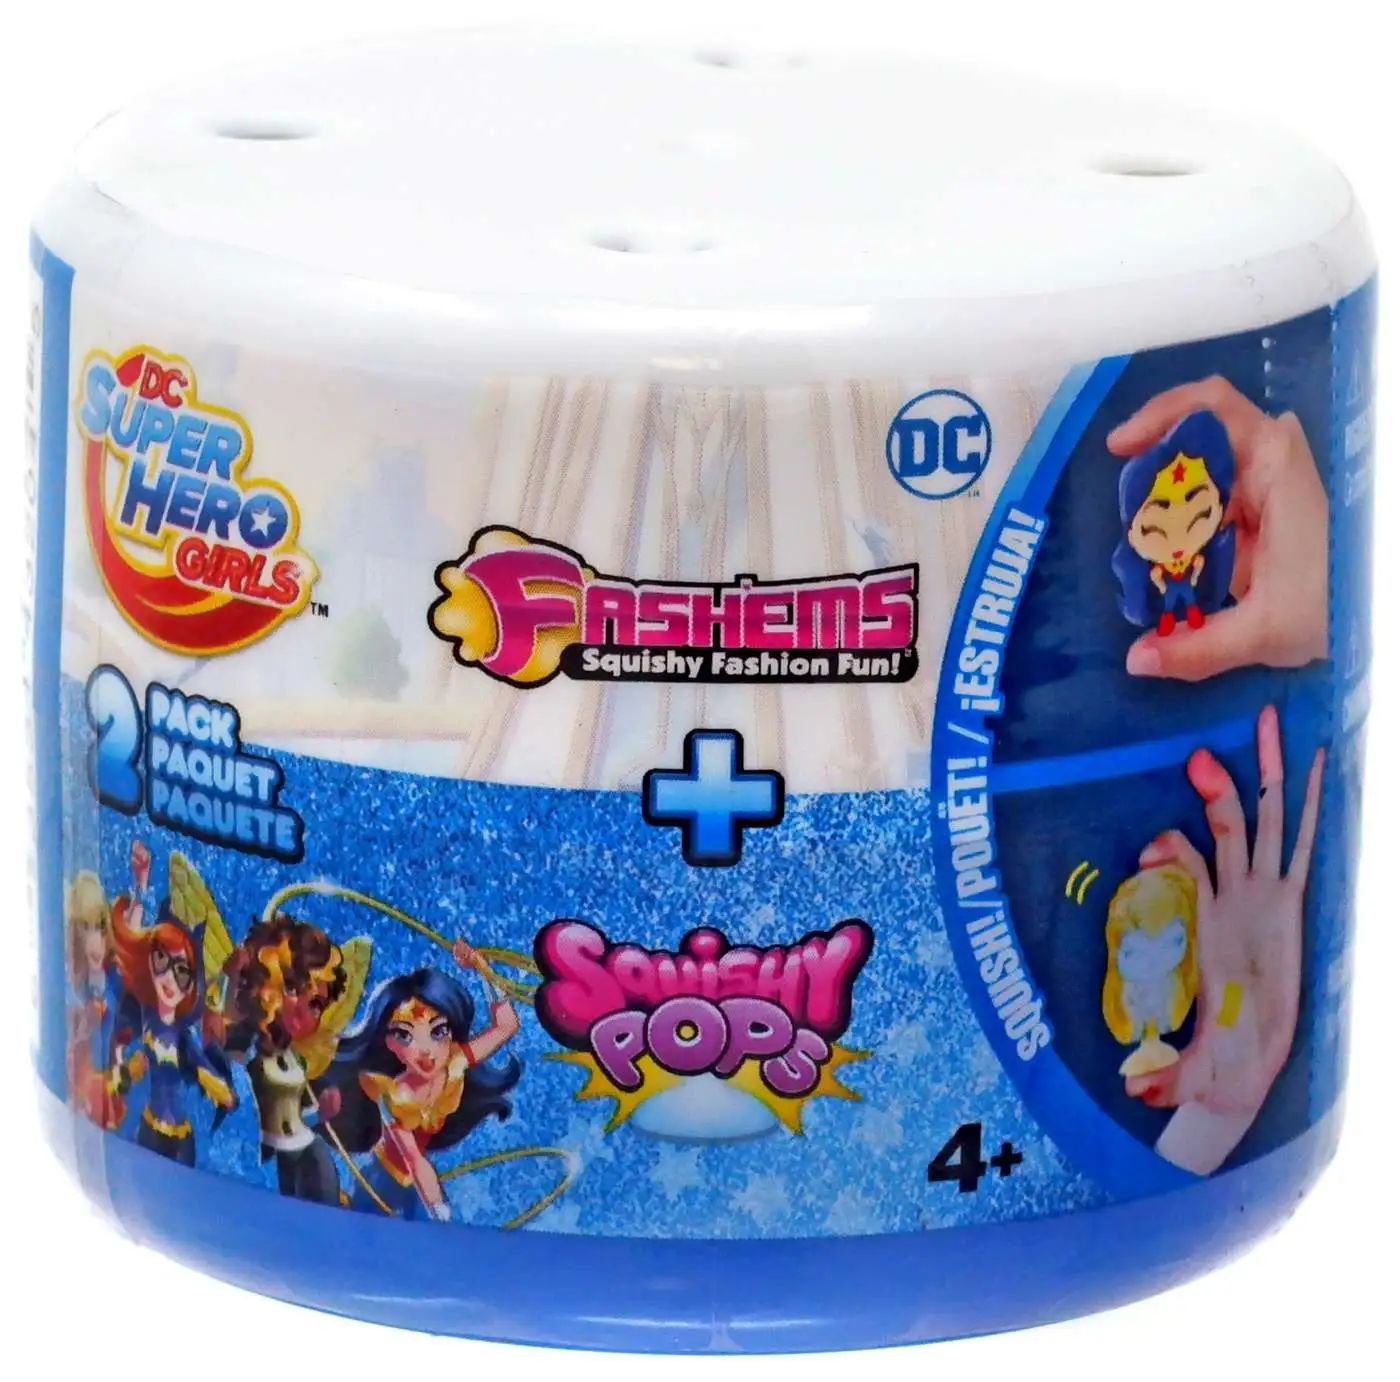 Tech4Kids Squishy Pops Fashion Pack Toy for sale online 